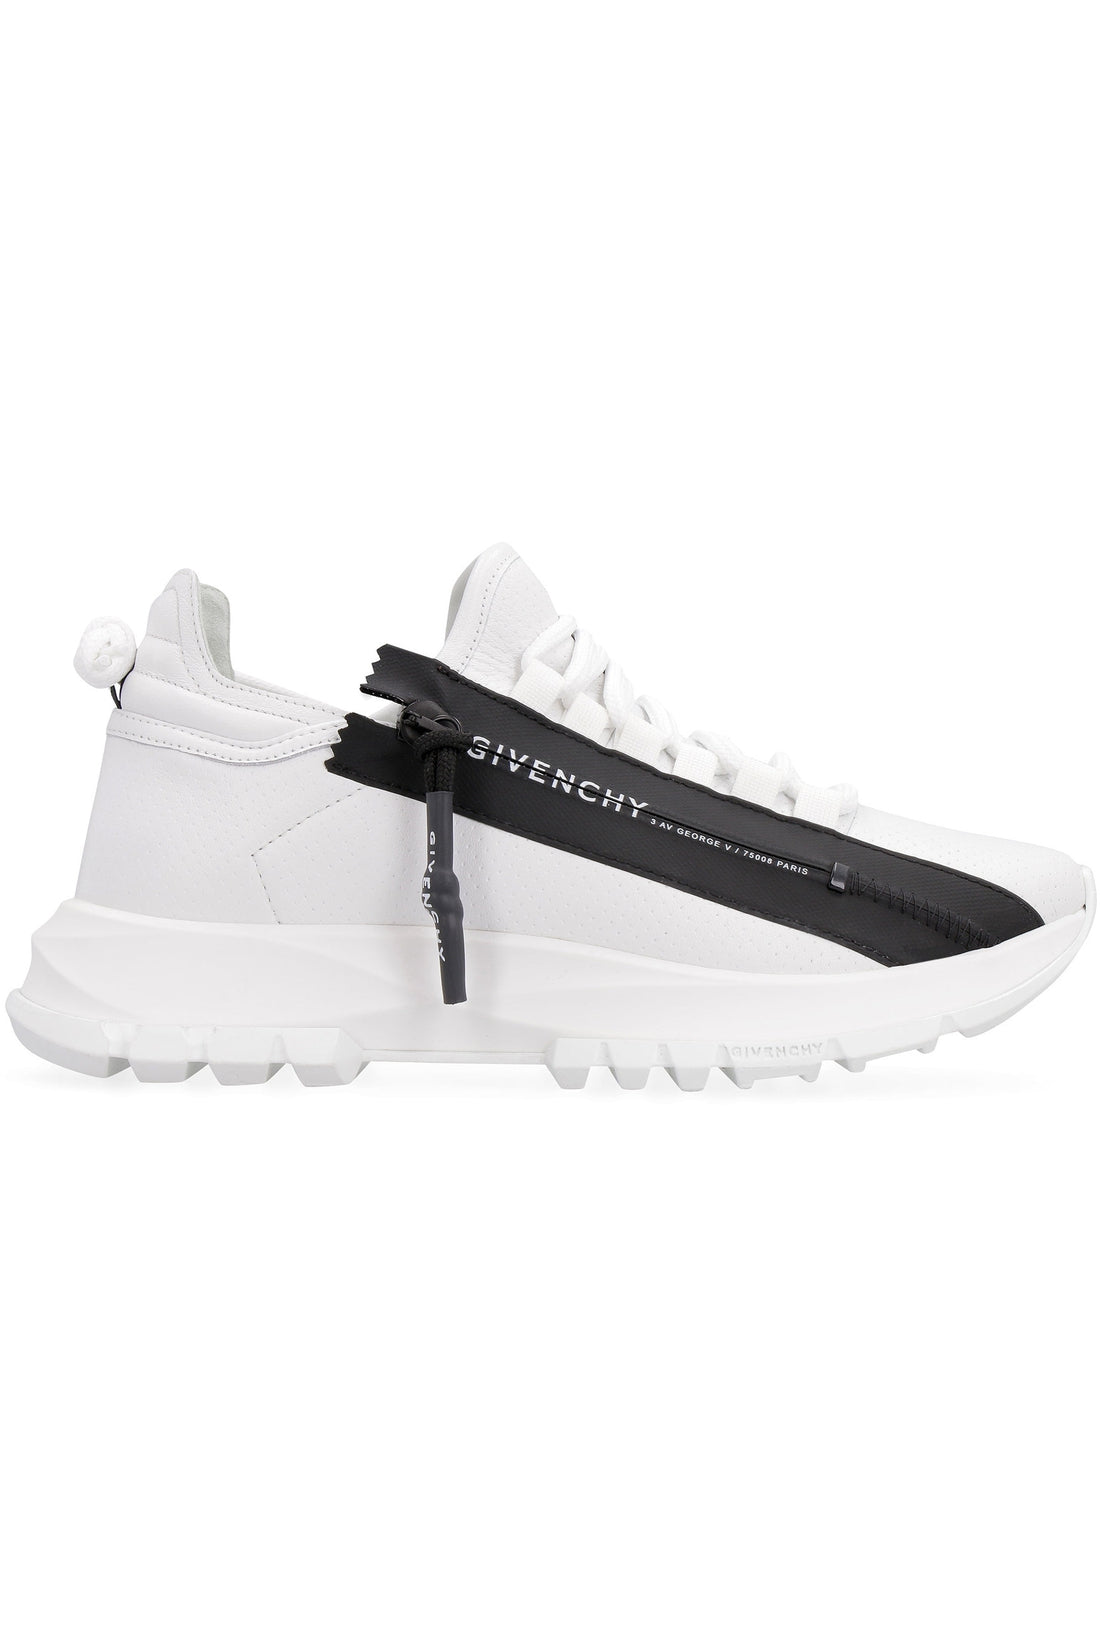 Givenchy-OUTLET-SALE-Spectre logo detail leather sneakers-ARCHIVIST